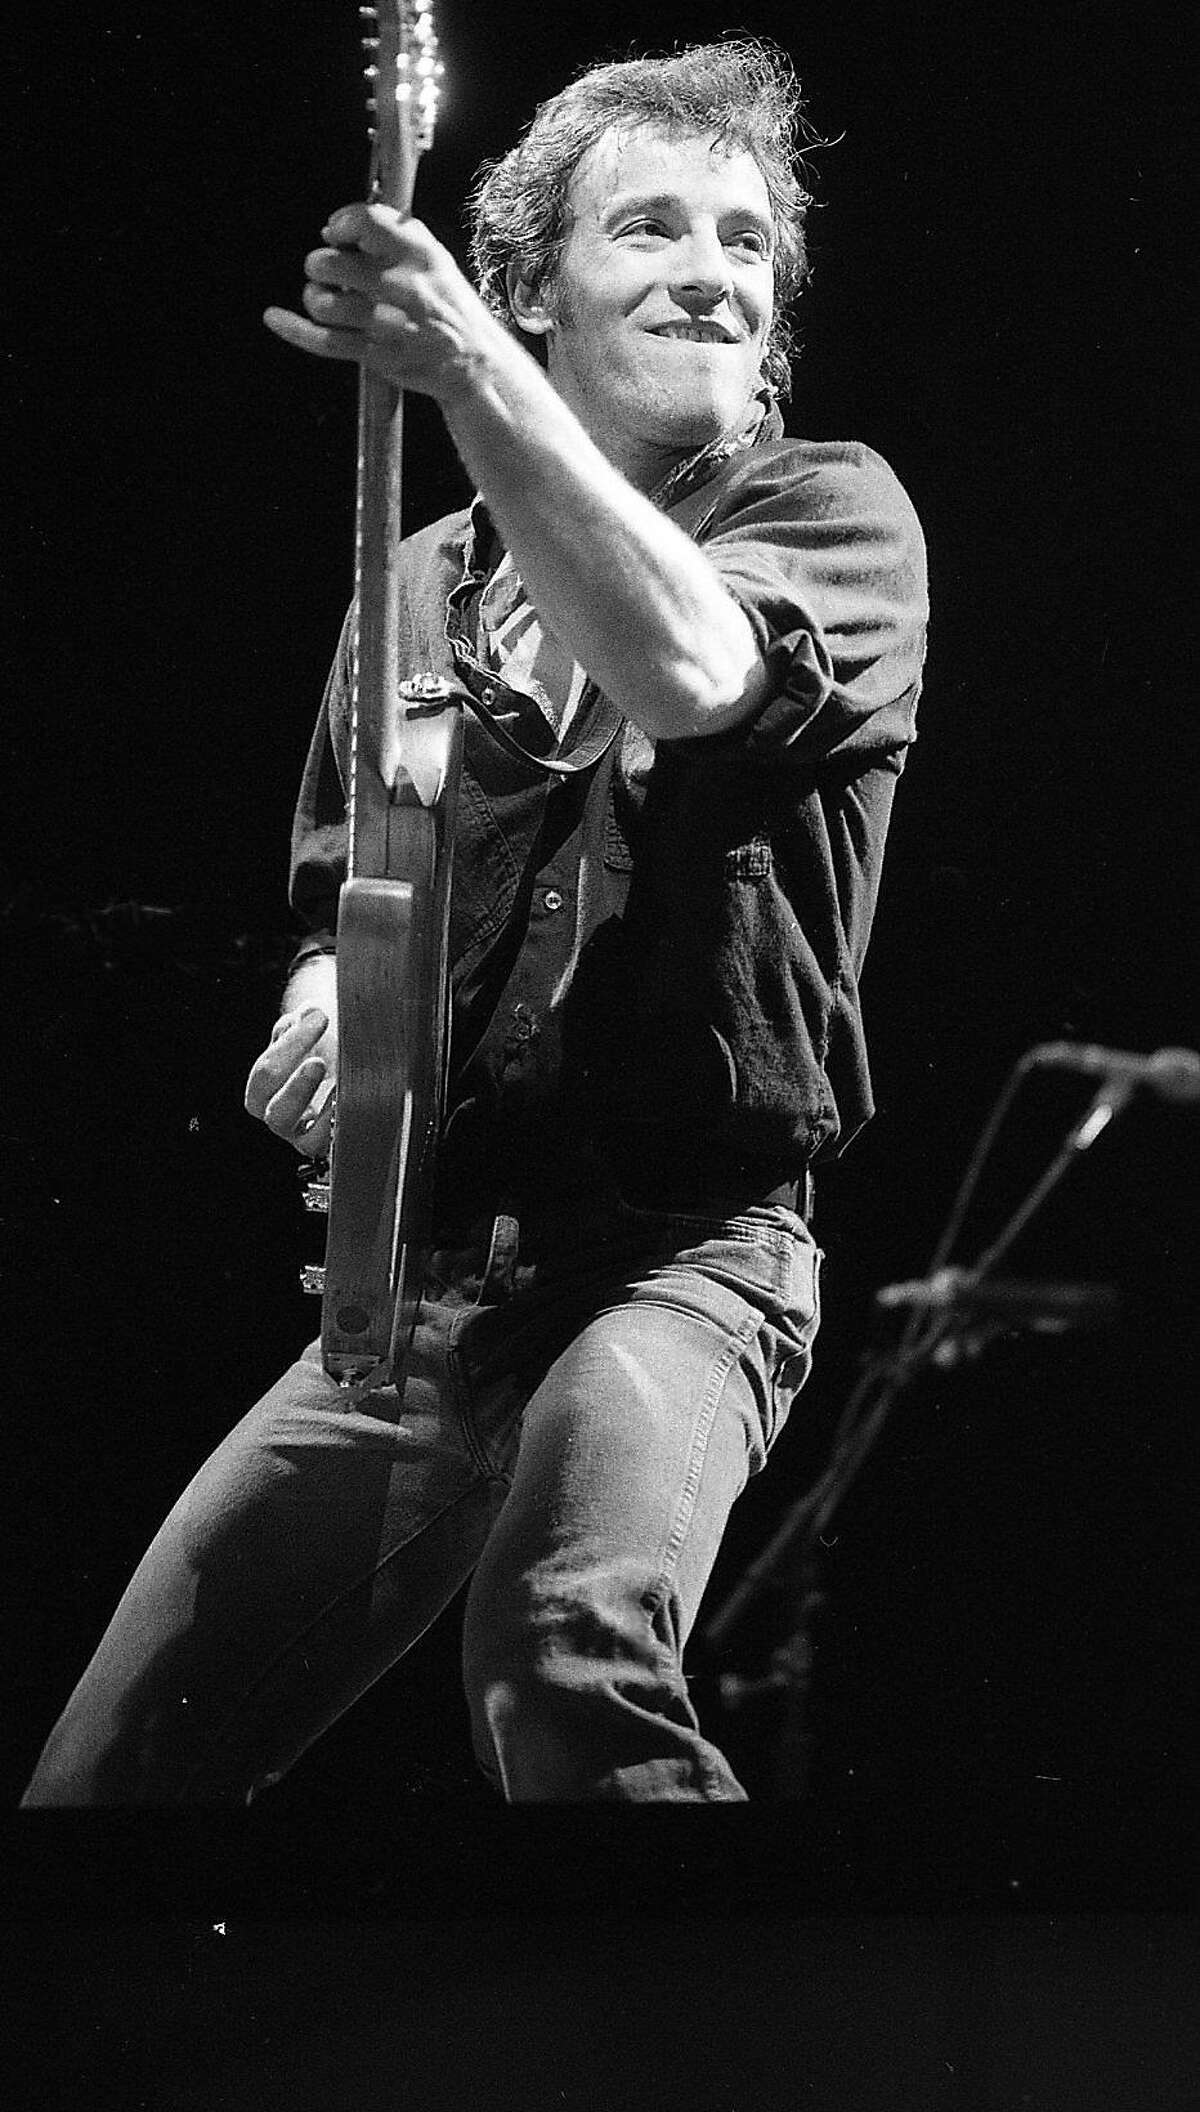 Bruce Springsteen concert in Tacoma Washington, on his next stop, he and the E St. Band would perform in the Bay Area. October 17, 1984